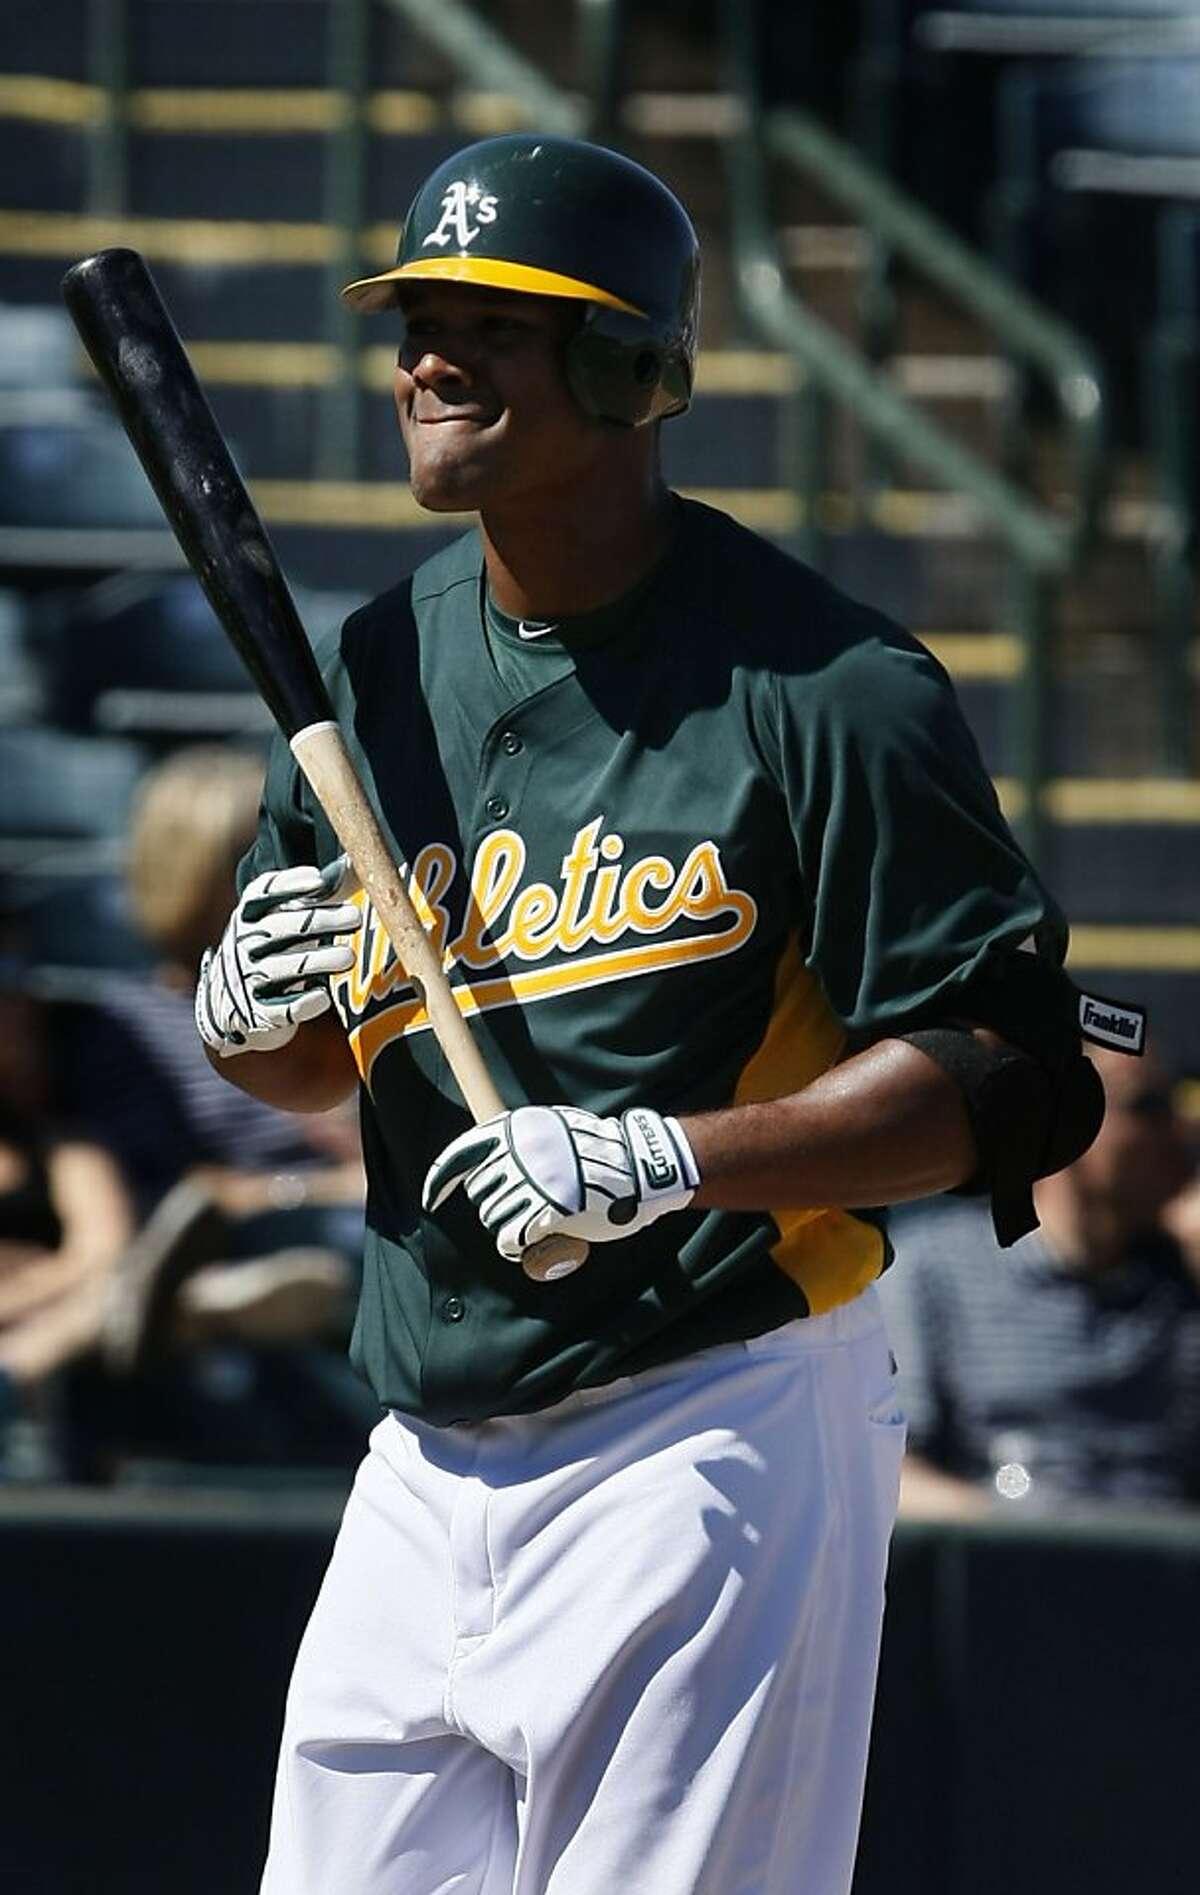 Oakland Athletics' Michael Taylor walks back to the dugout after hitting an infield pop up in the fourth inning of a spring training baseball game against the Cleveland Indians Wednesday, March. 2, 2011 in Phoenix Ariz. The Athletics defeated the Indians 4-3. Ran on: 03-04-2011 Michael Taylor wants to make a big impression this spring, but he has a more basic goal.